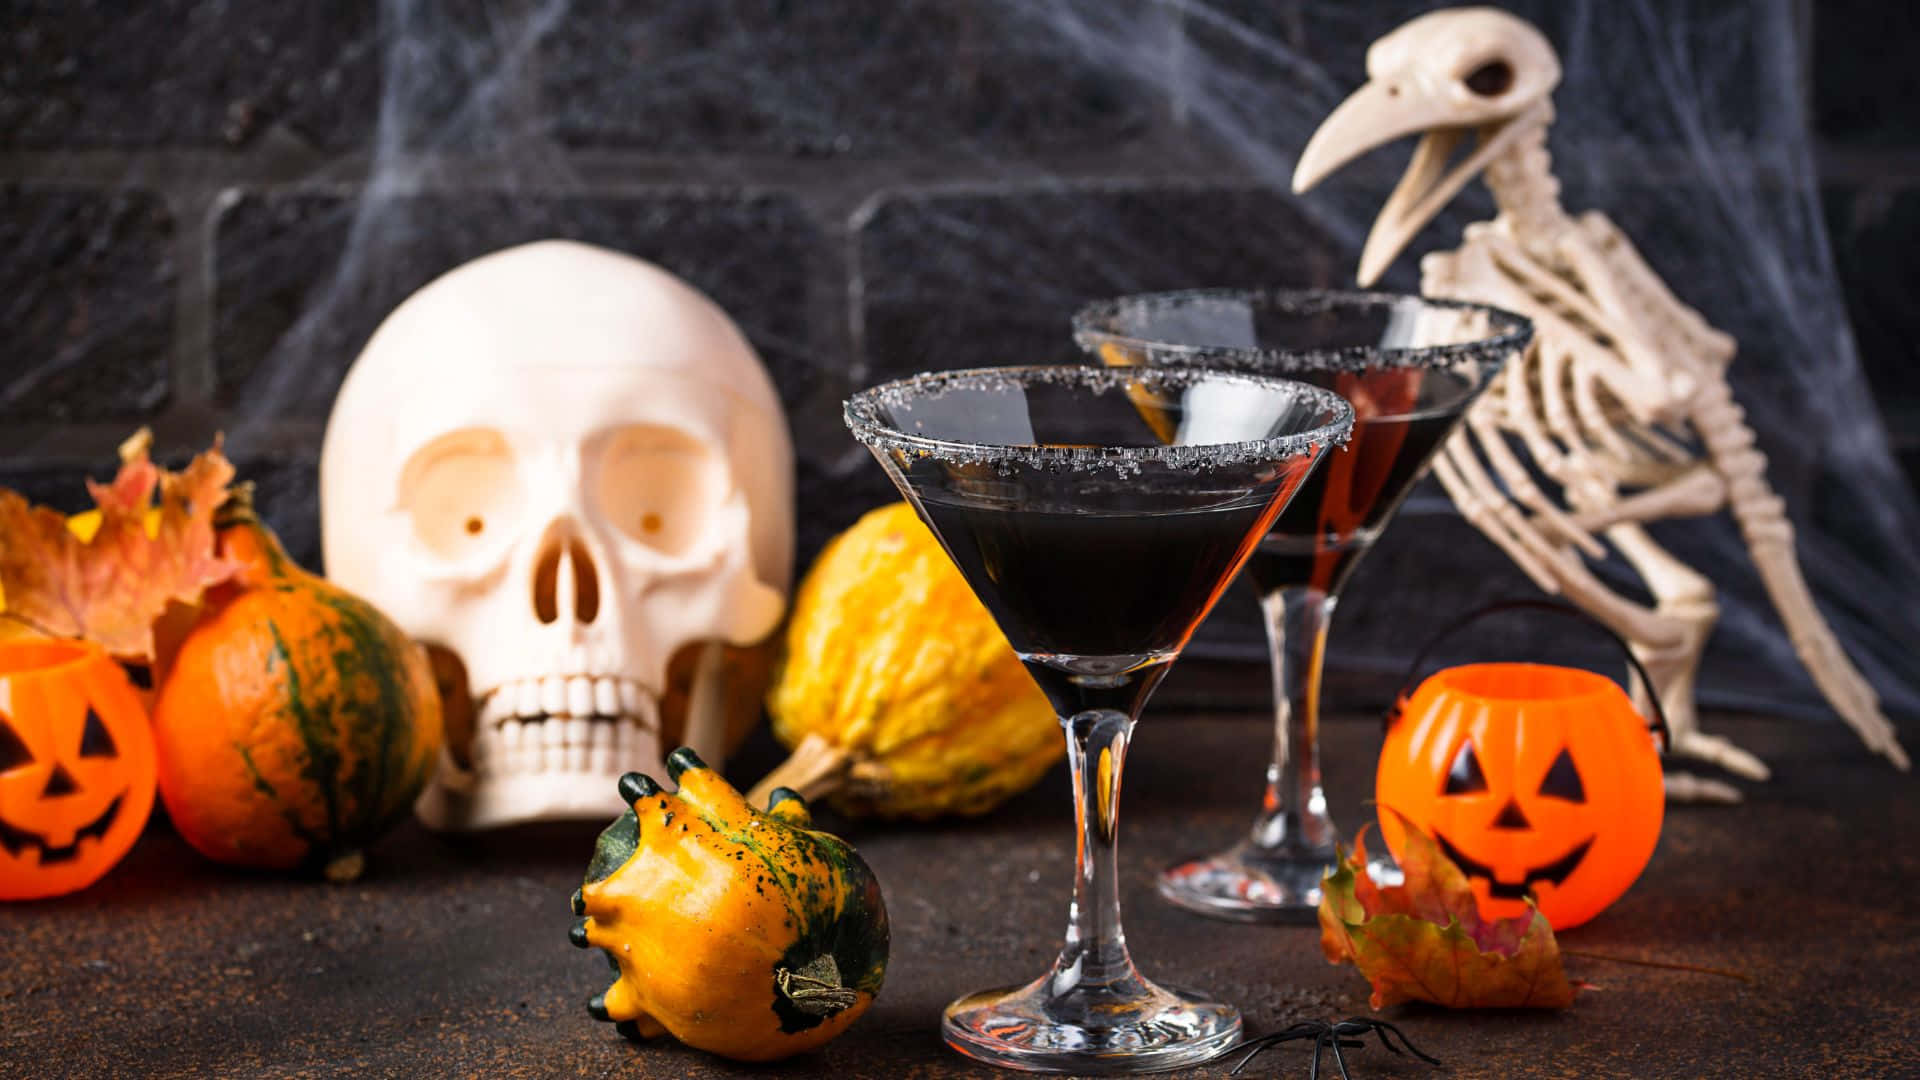 Get creative with your drinks this Halloween! Wallpaper